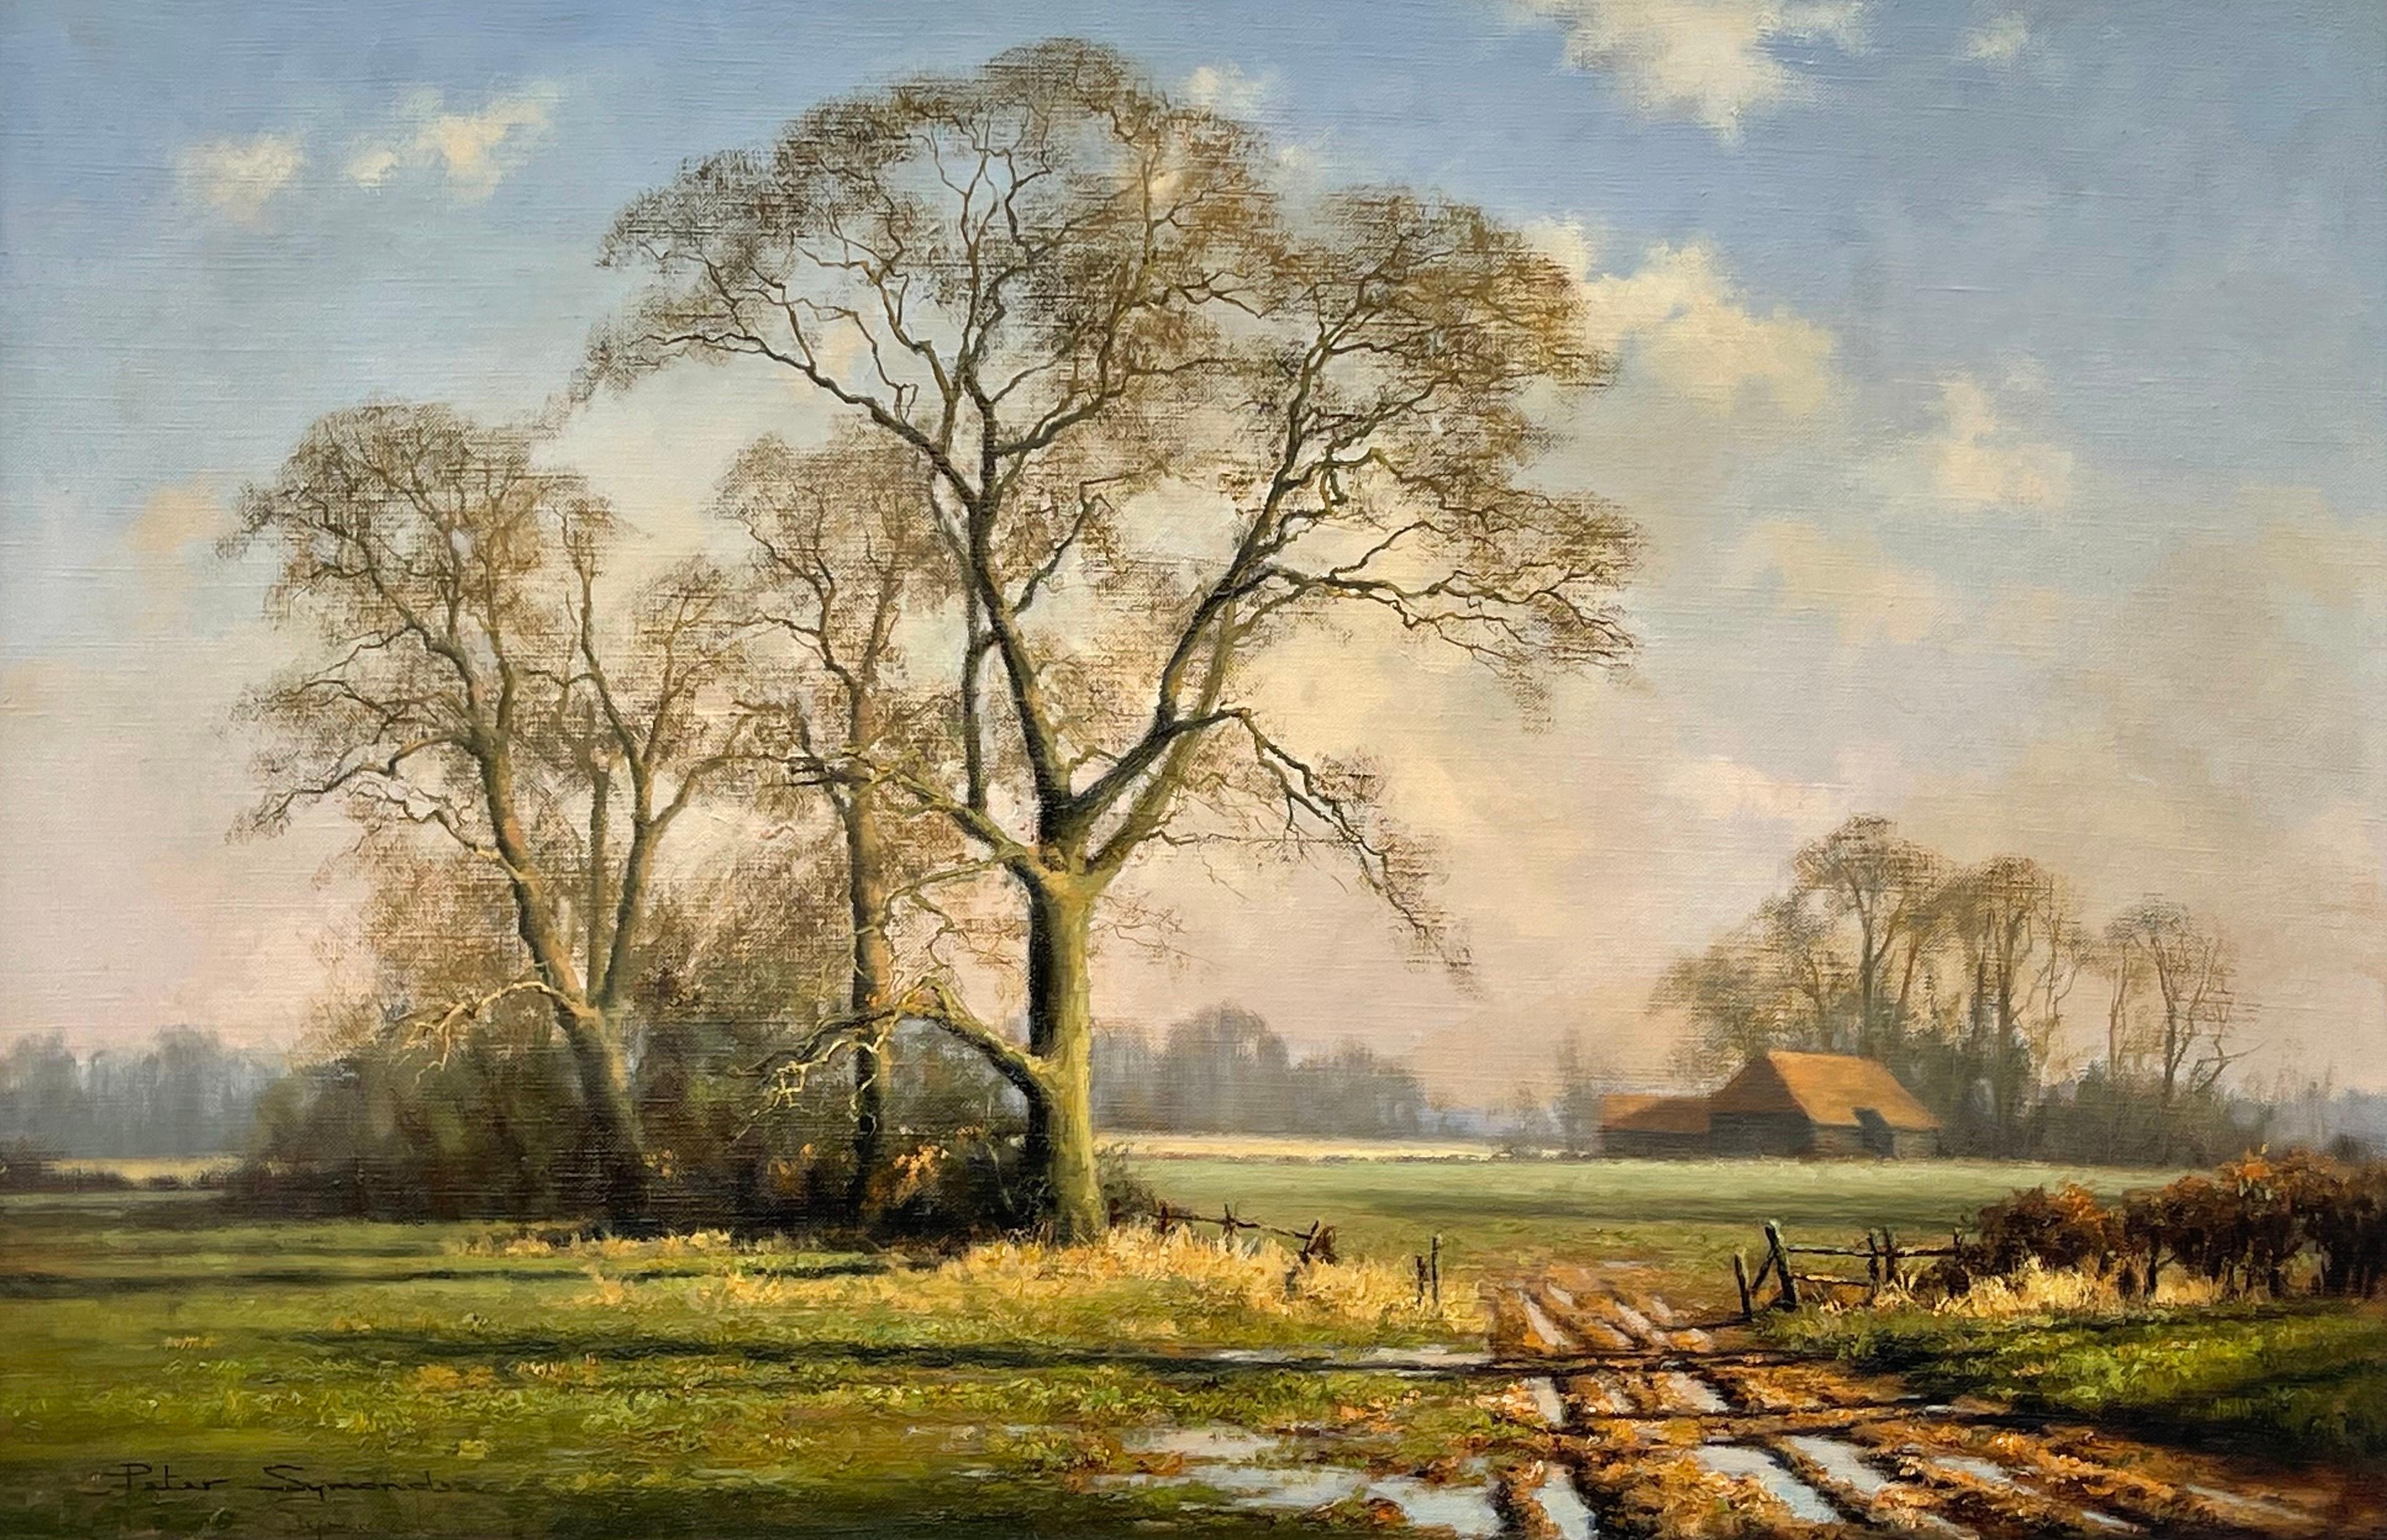 Oil Painting of Rural Winter Scene with Oak Trees in England by British Artist For Sale 6